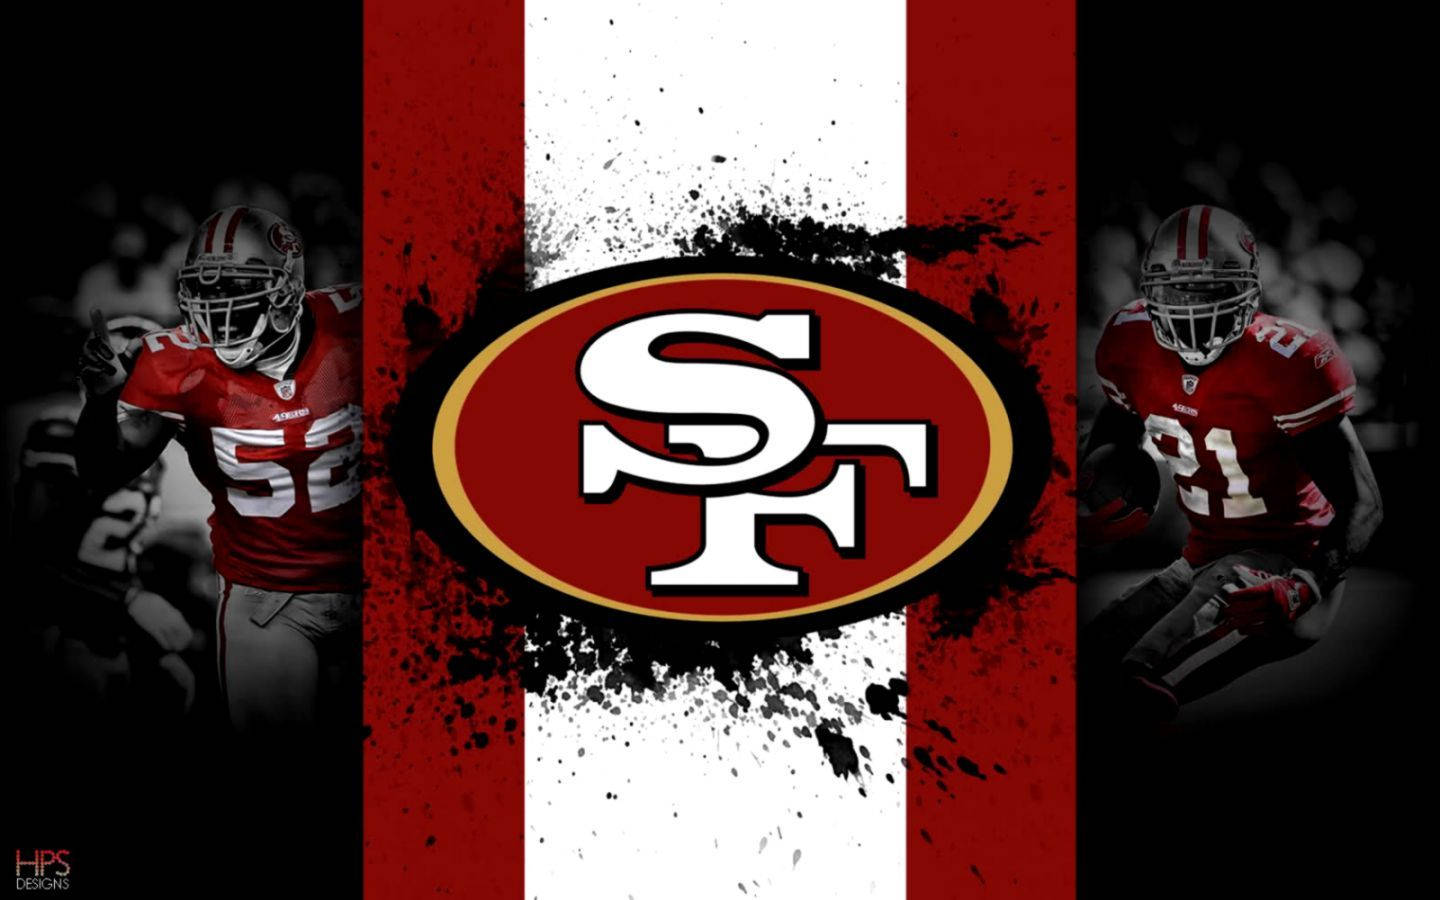 Patrick Willis And Deion Sanders Taking The San Francisco 49ers To Victory. Wallpaper